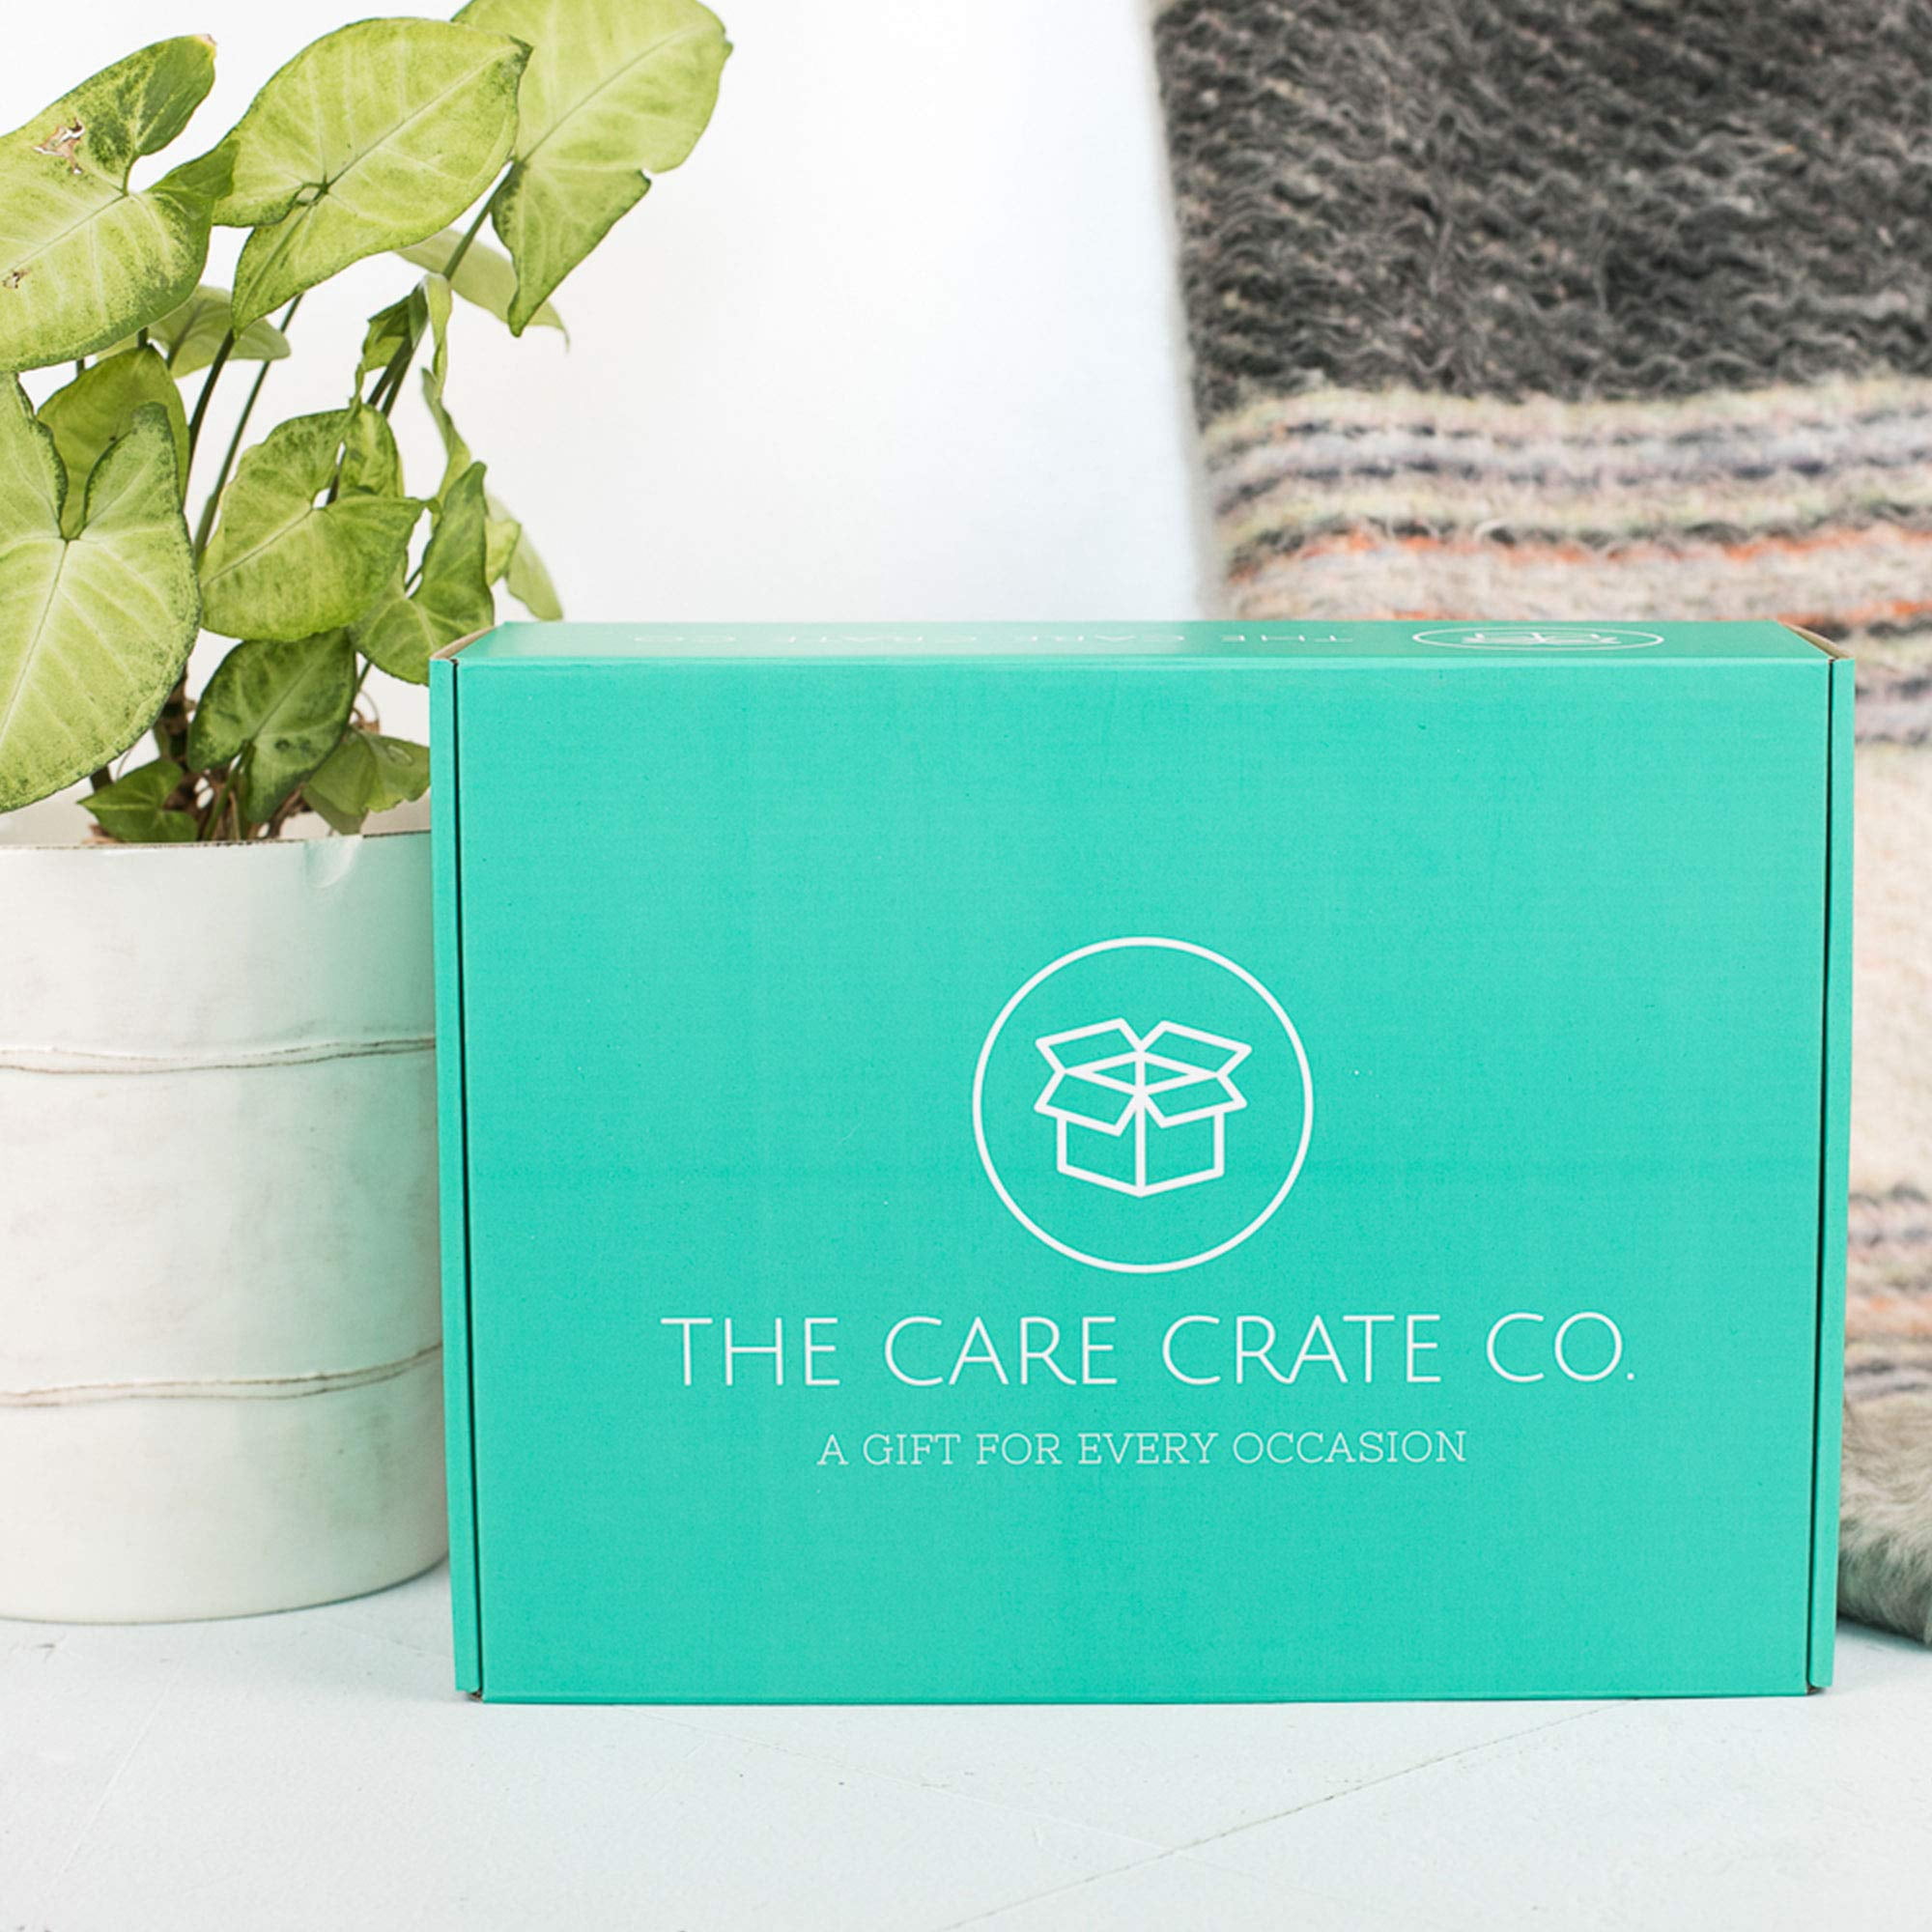 The Peaceful Postpartum Gift Box - Care Package for New Mom — NURTURED 9